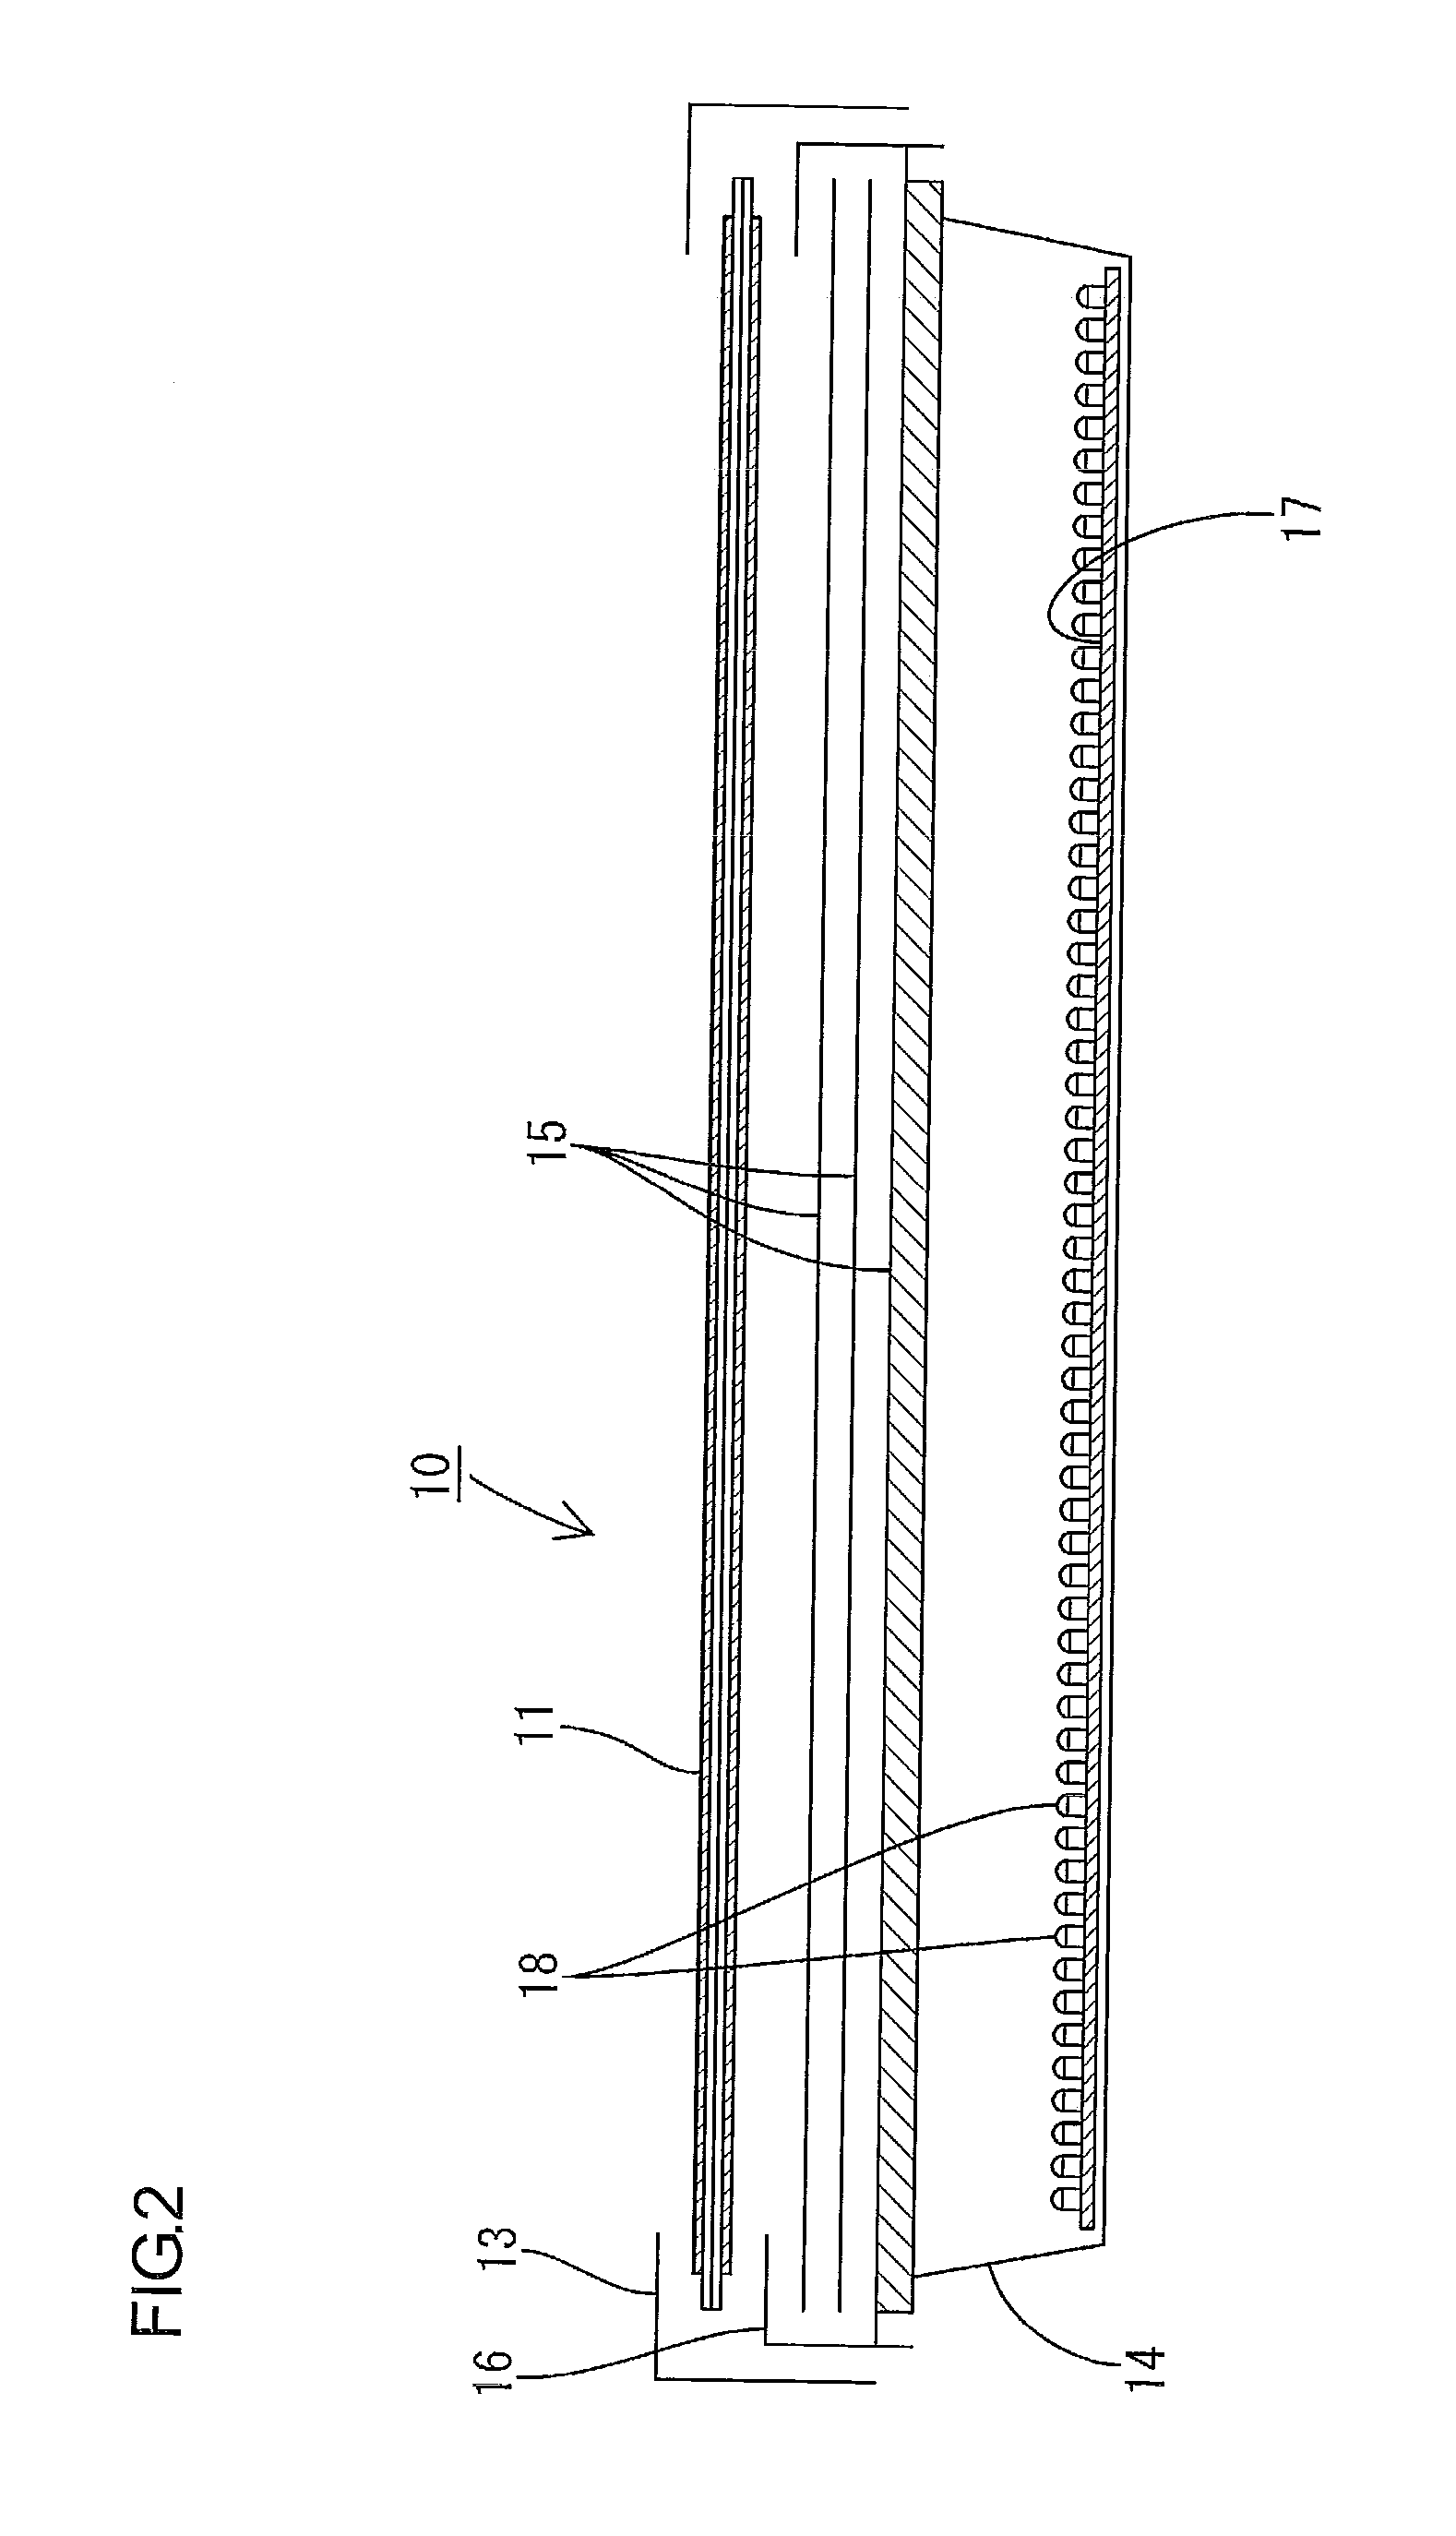 Liquid crystal display apparatus and manufacturing method thereof